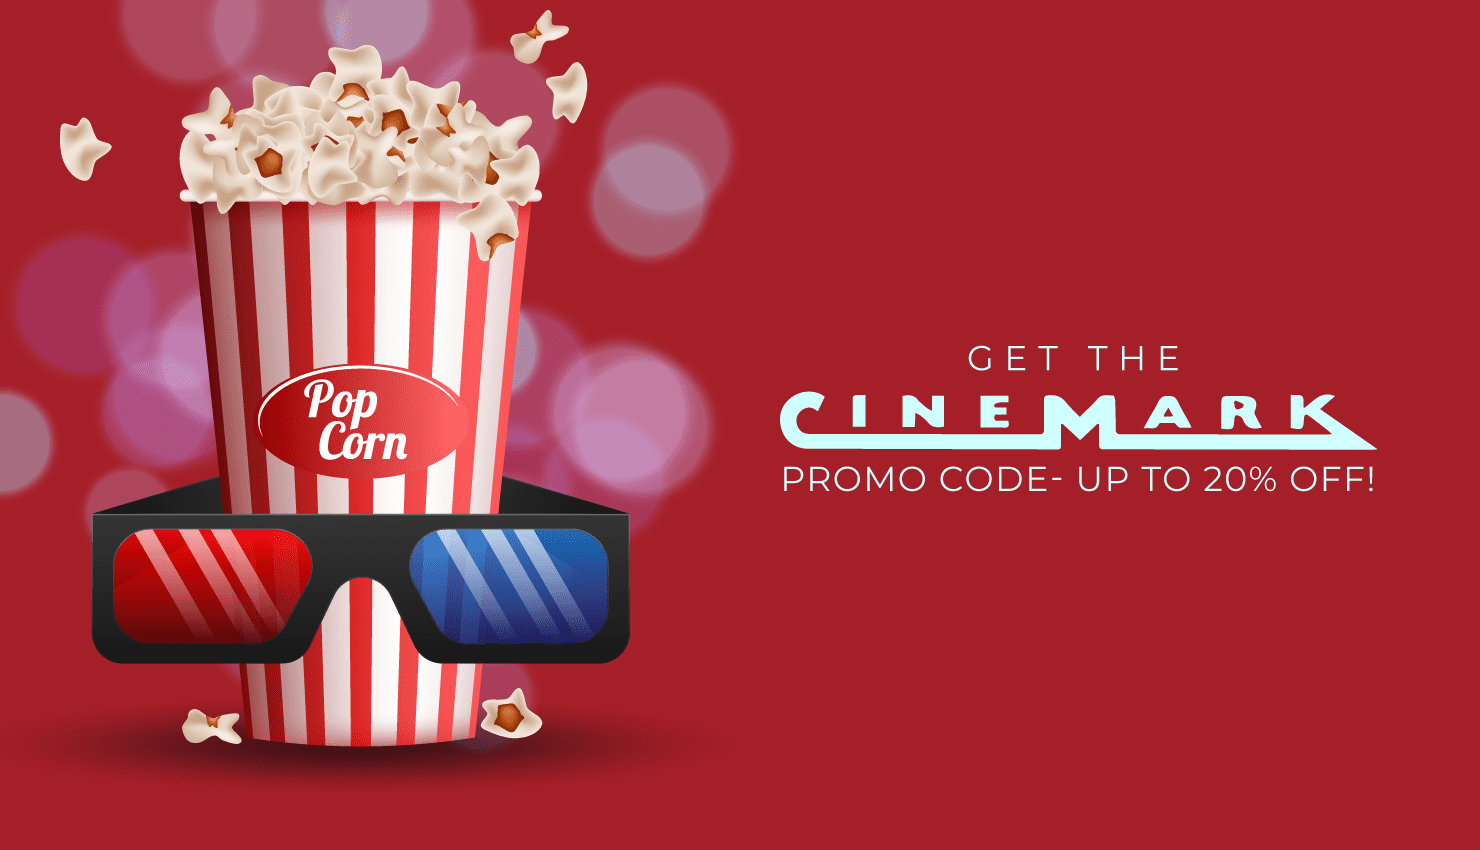 Get the Cinemark Promo Code- Up To 20% Off!